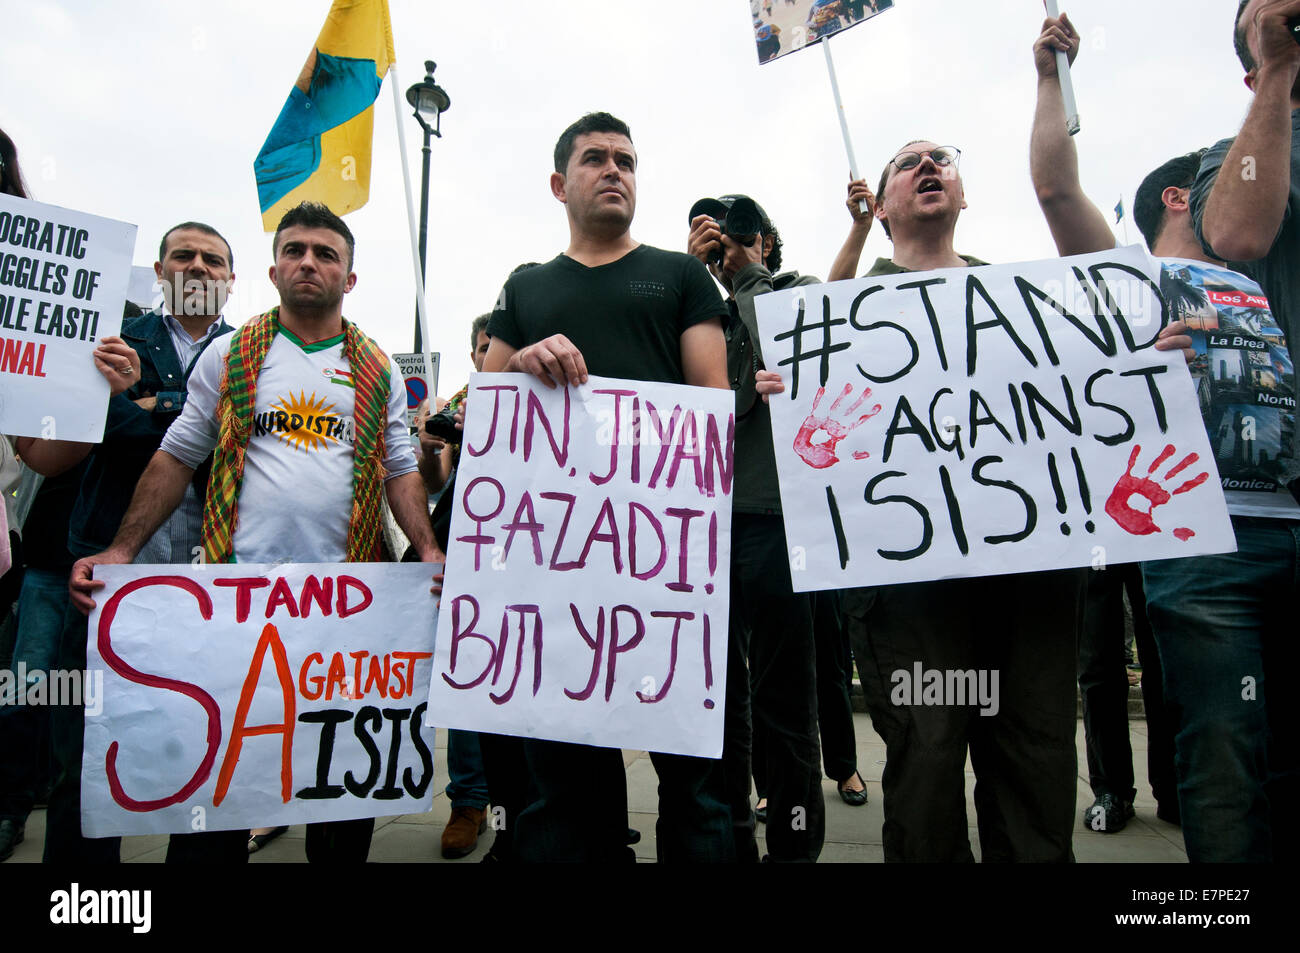 Protest in Parliament Square London against  ISIS / Islamic State massacres Kurds in Iraq and Syria Sept 20 2014 Stock Photo